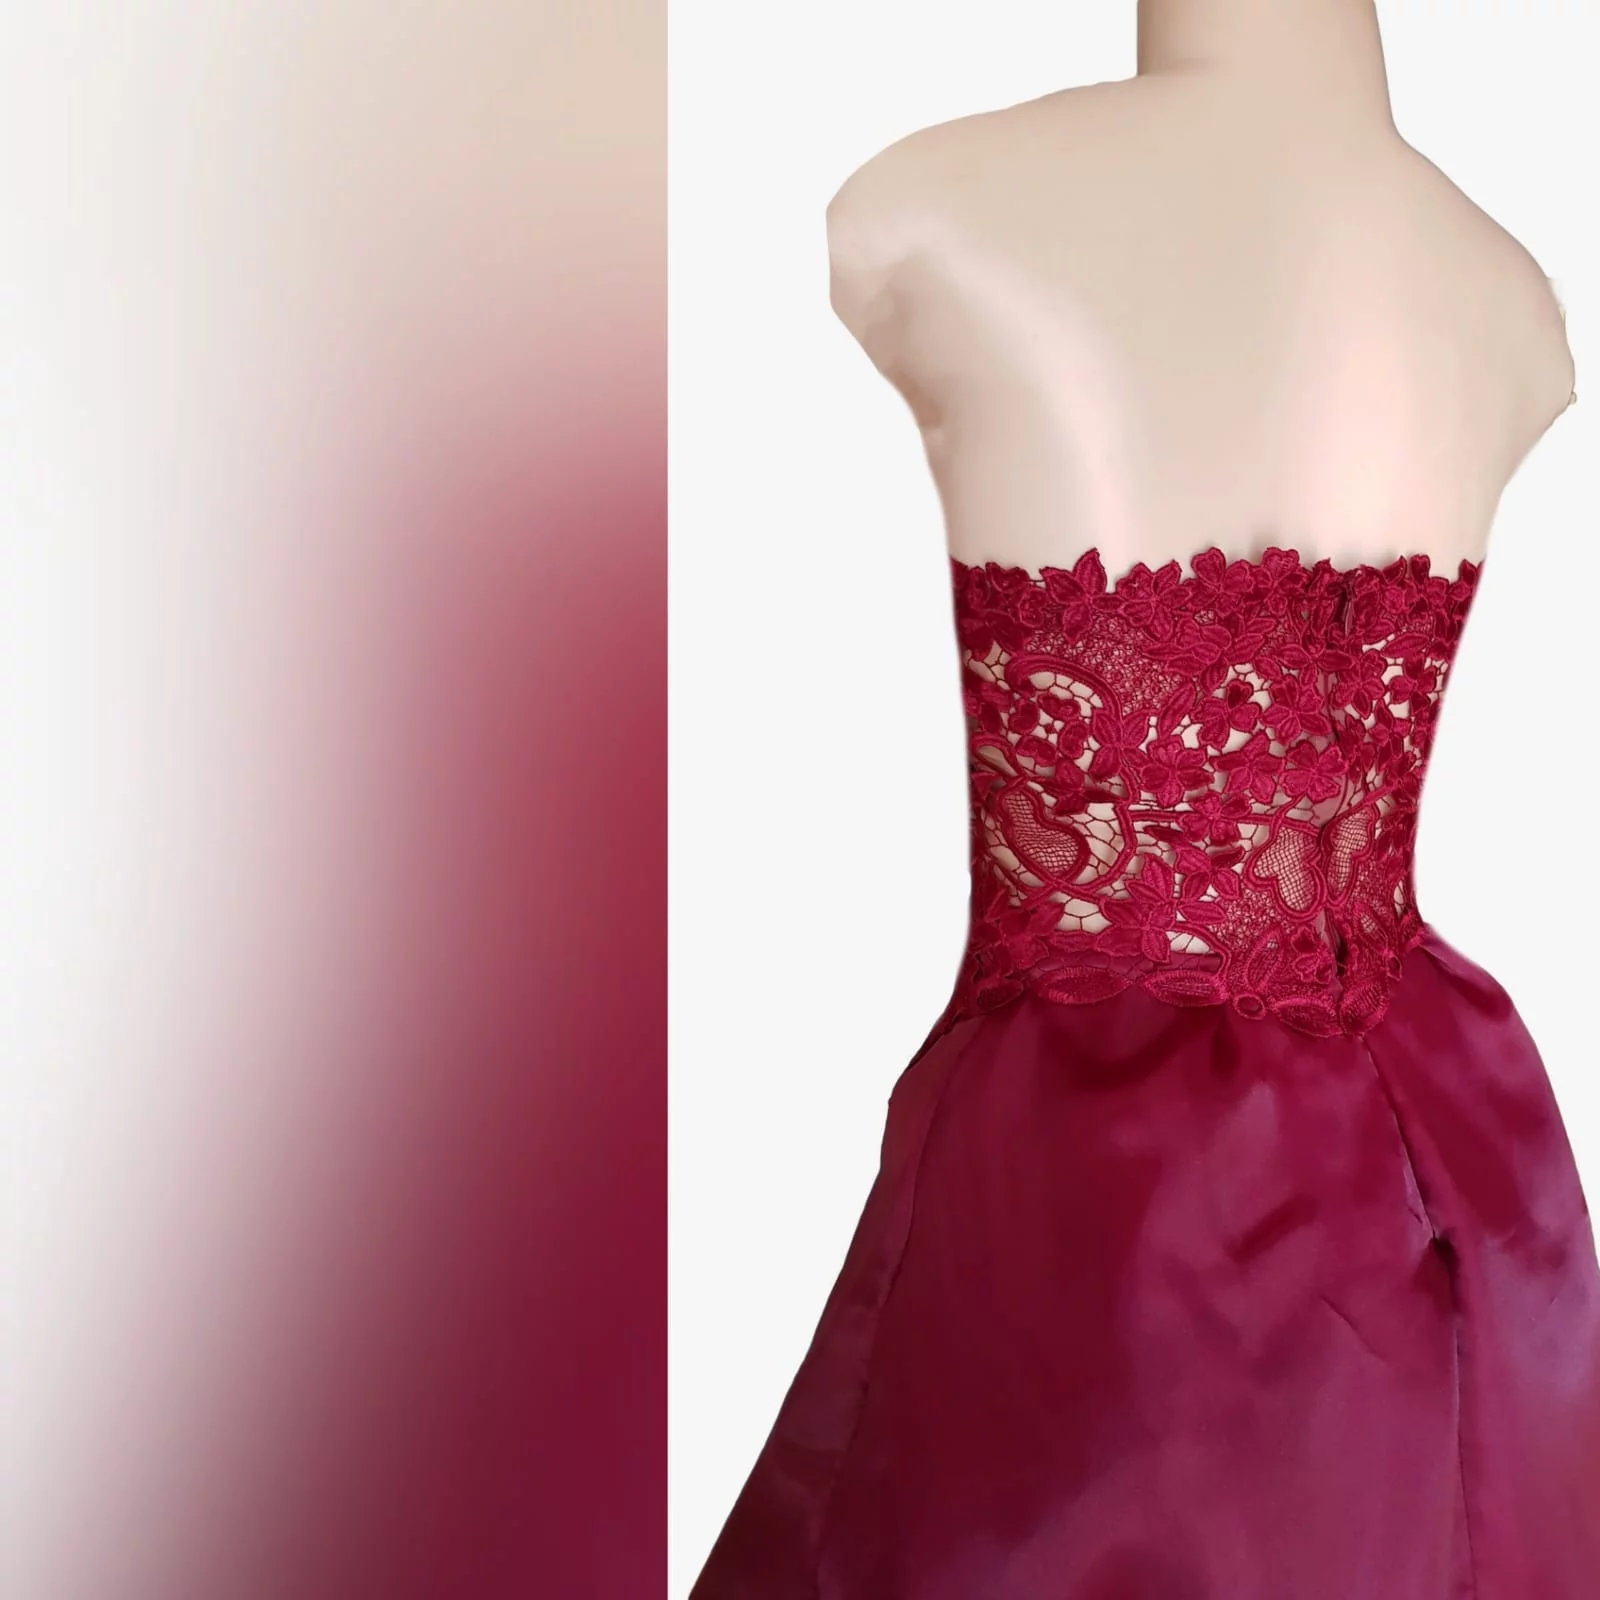 Dark red high low evening dress 5 the perfect dark red evening dress for your prom night if you want to look elegant yet adorable. With a lace bodice and a double layer hi - lo flowy bottom for a slight dramatic effect.